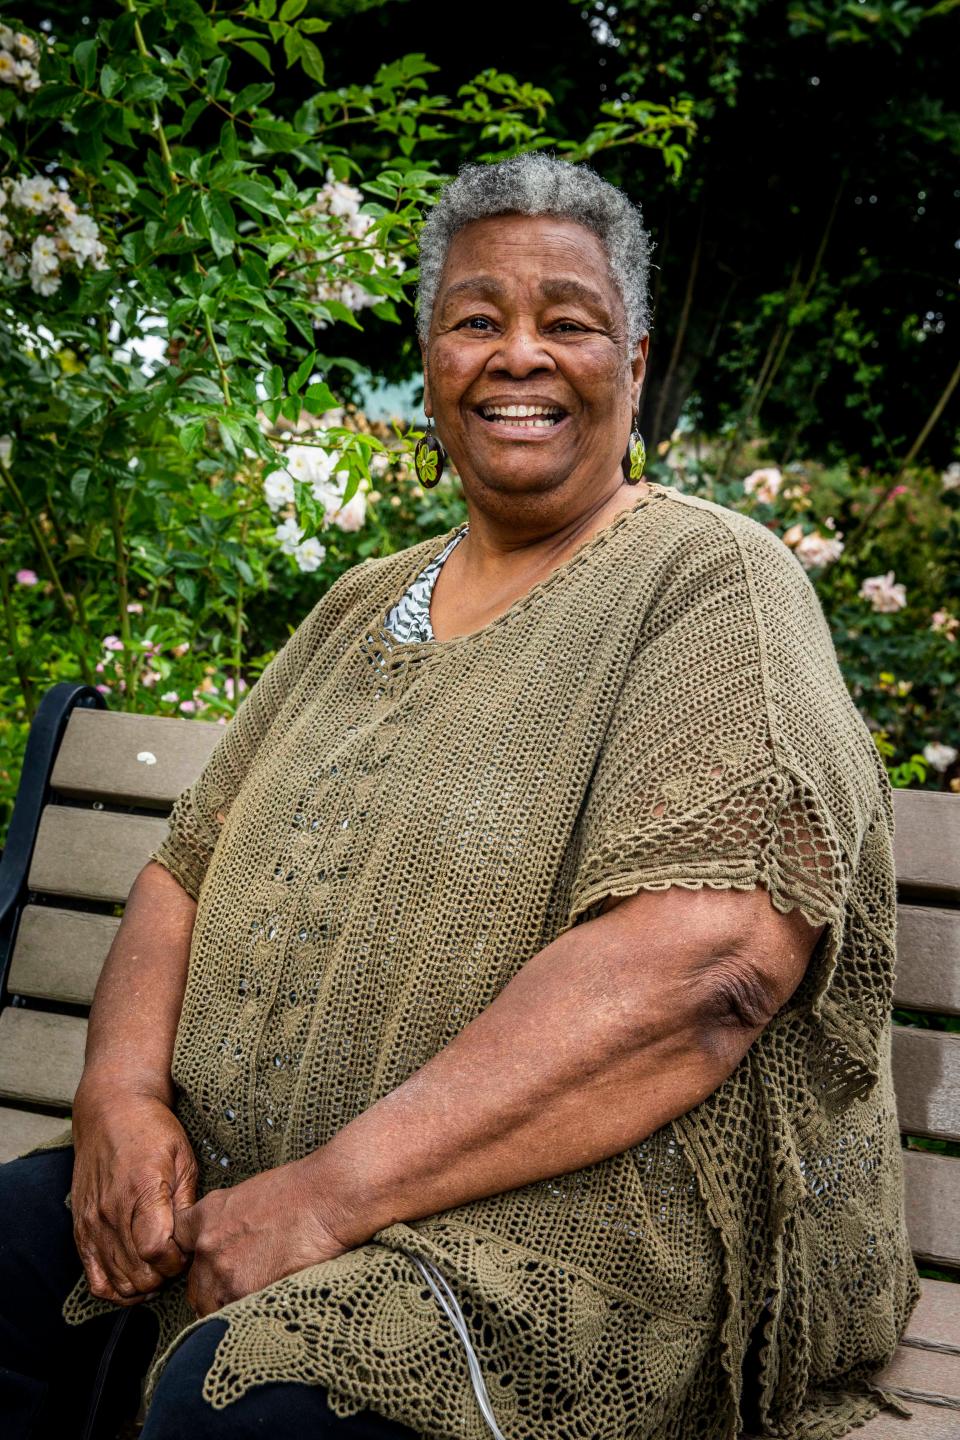 Lyllye Reynolds-Parker is a Eugene native known for her contributions to the community in her work as a civil rights advocate and as an academic adviser the University of Oregon. She also worked for the Office of Multicultural Academic Success.